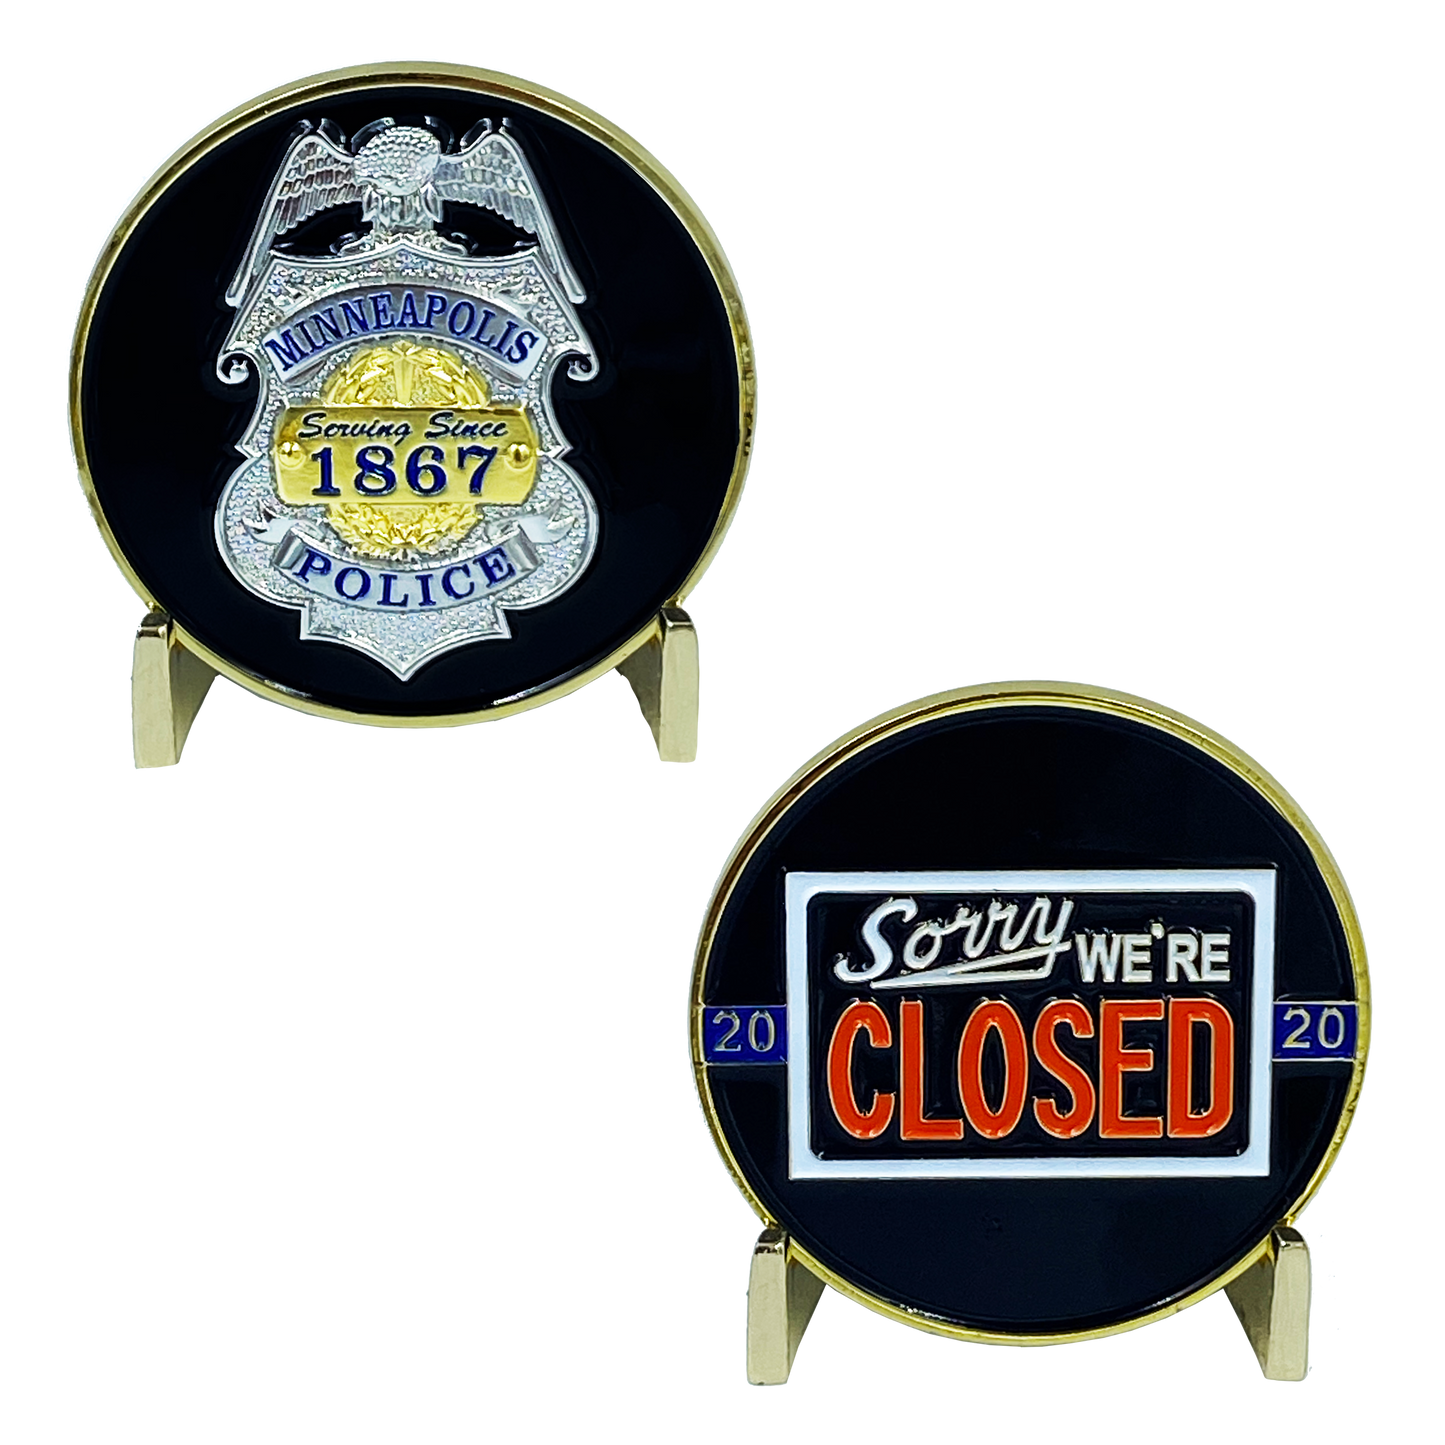 G-013 MINNEAPOLIS POLICE DEPARTMENT PD MPD WALK OFF BLUE FLU CHALLENGE COIN SORRY WE’RE CLOSED